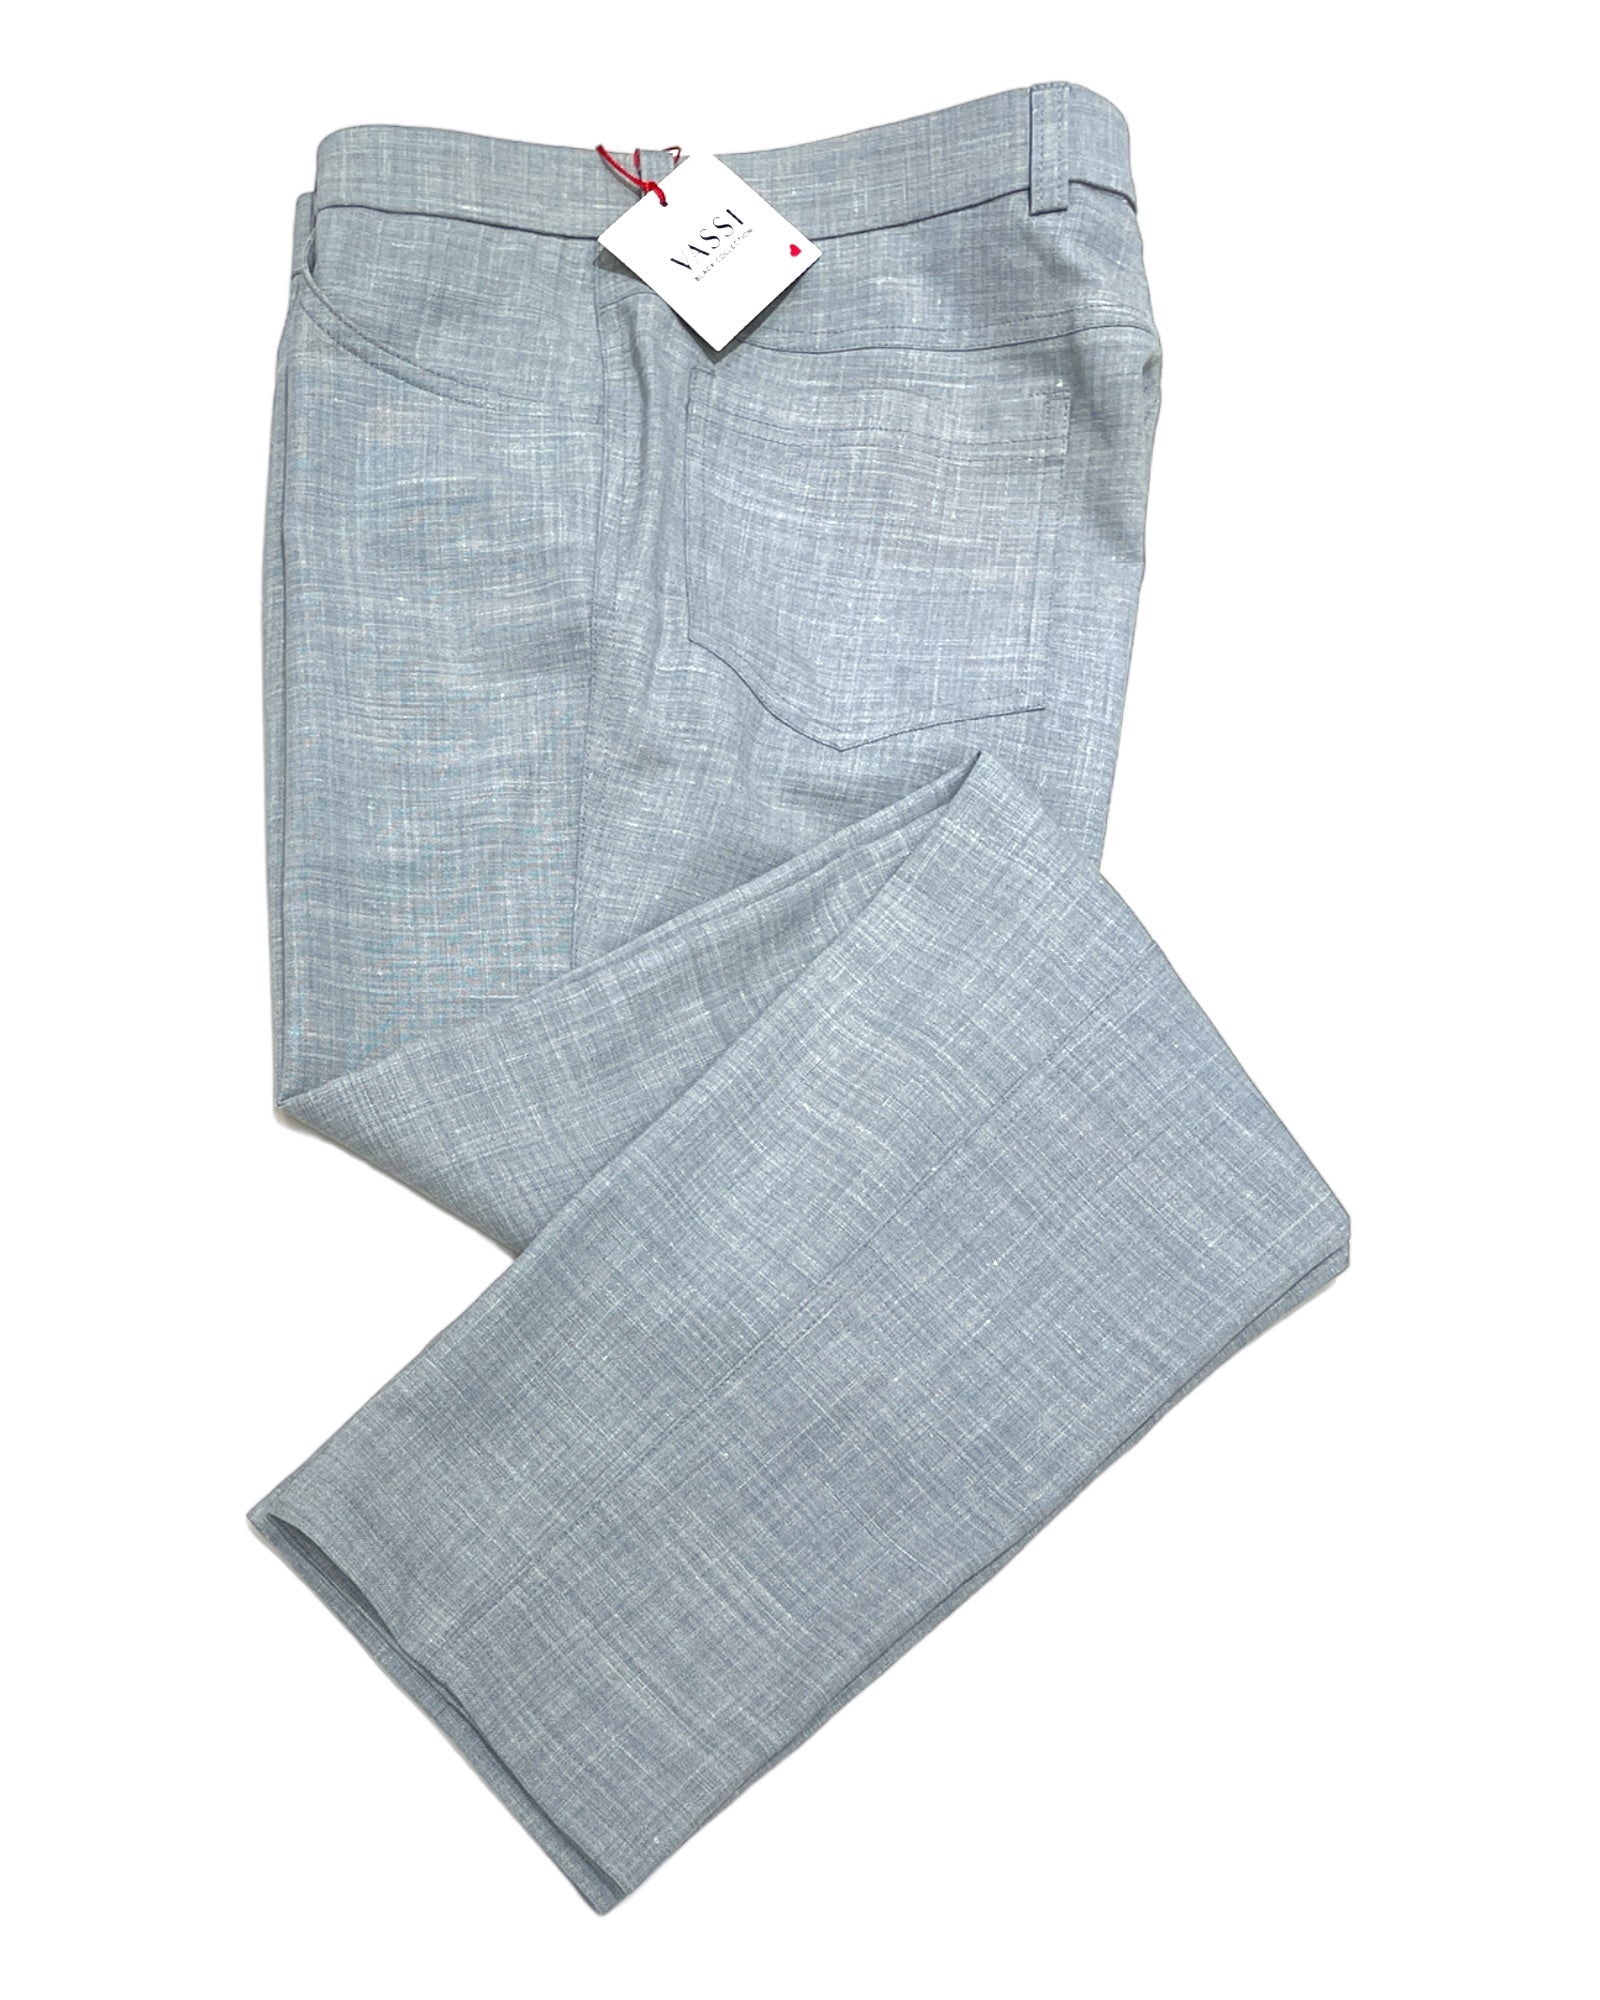 Easy Care Linen 5-Pocket Pants in Light Grey CASUAL PANTS32